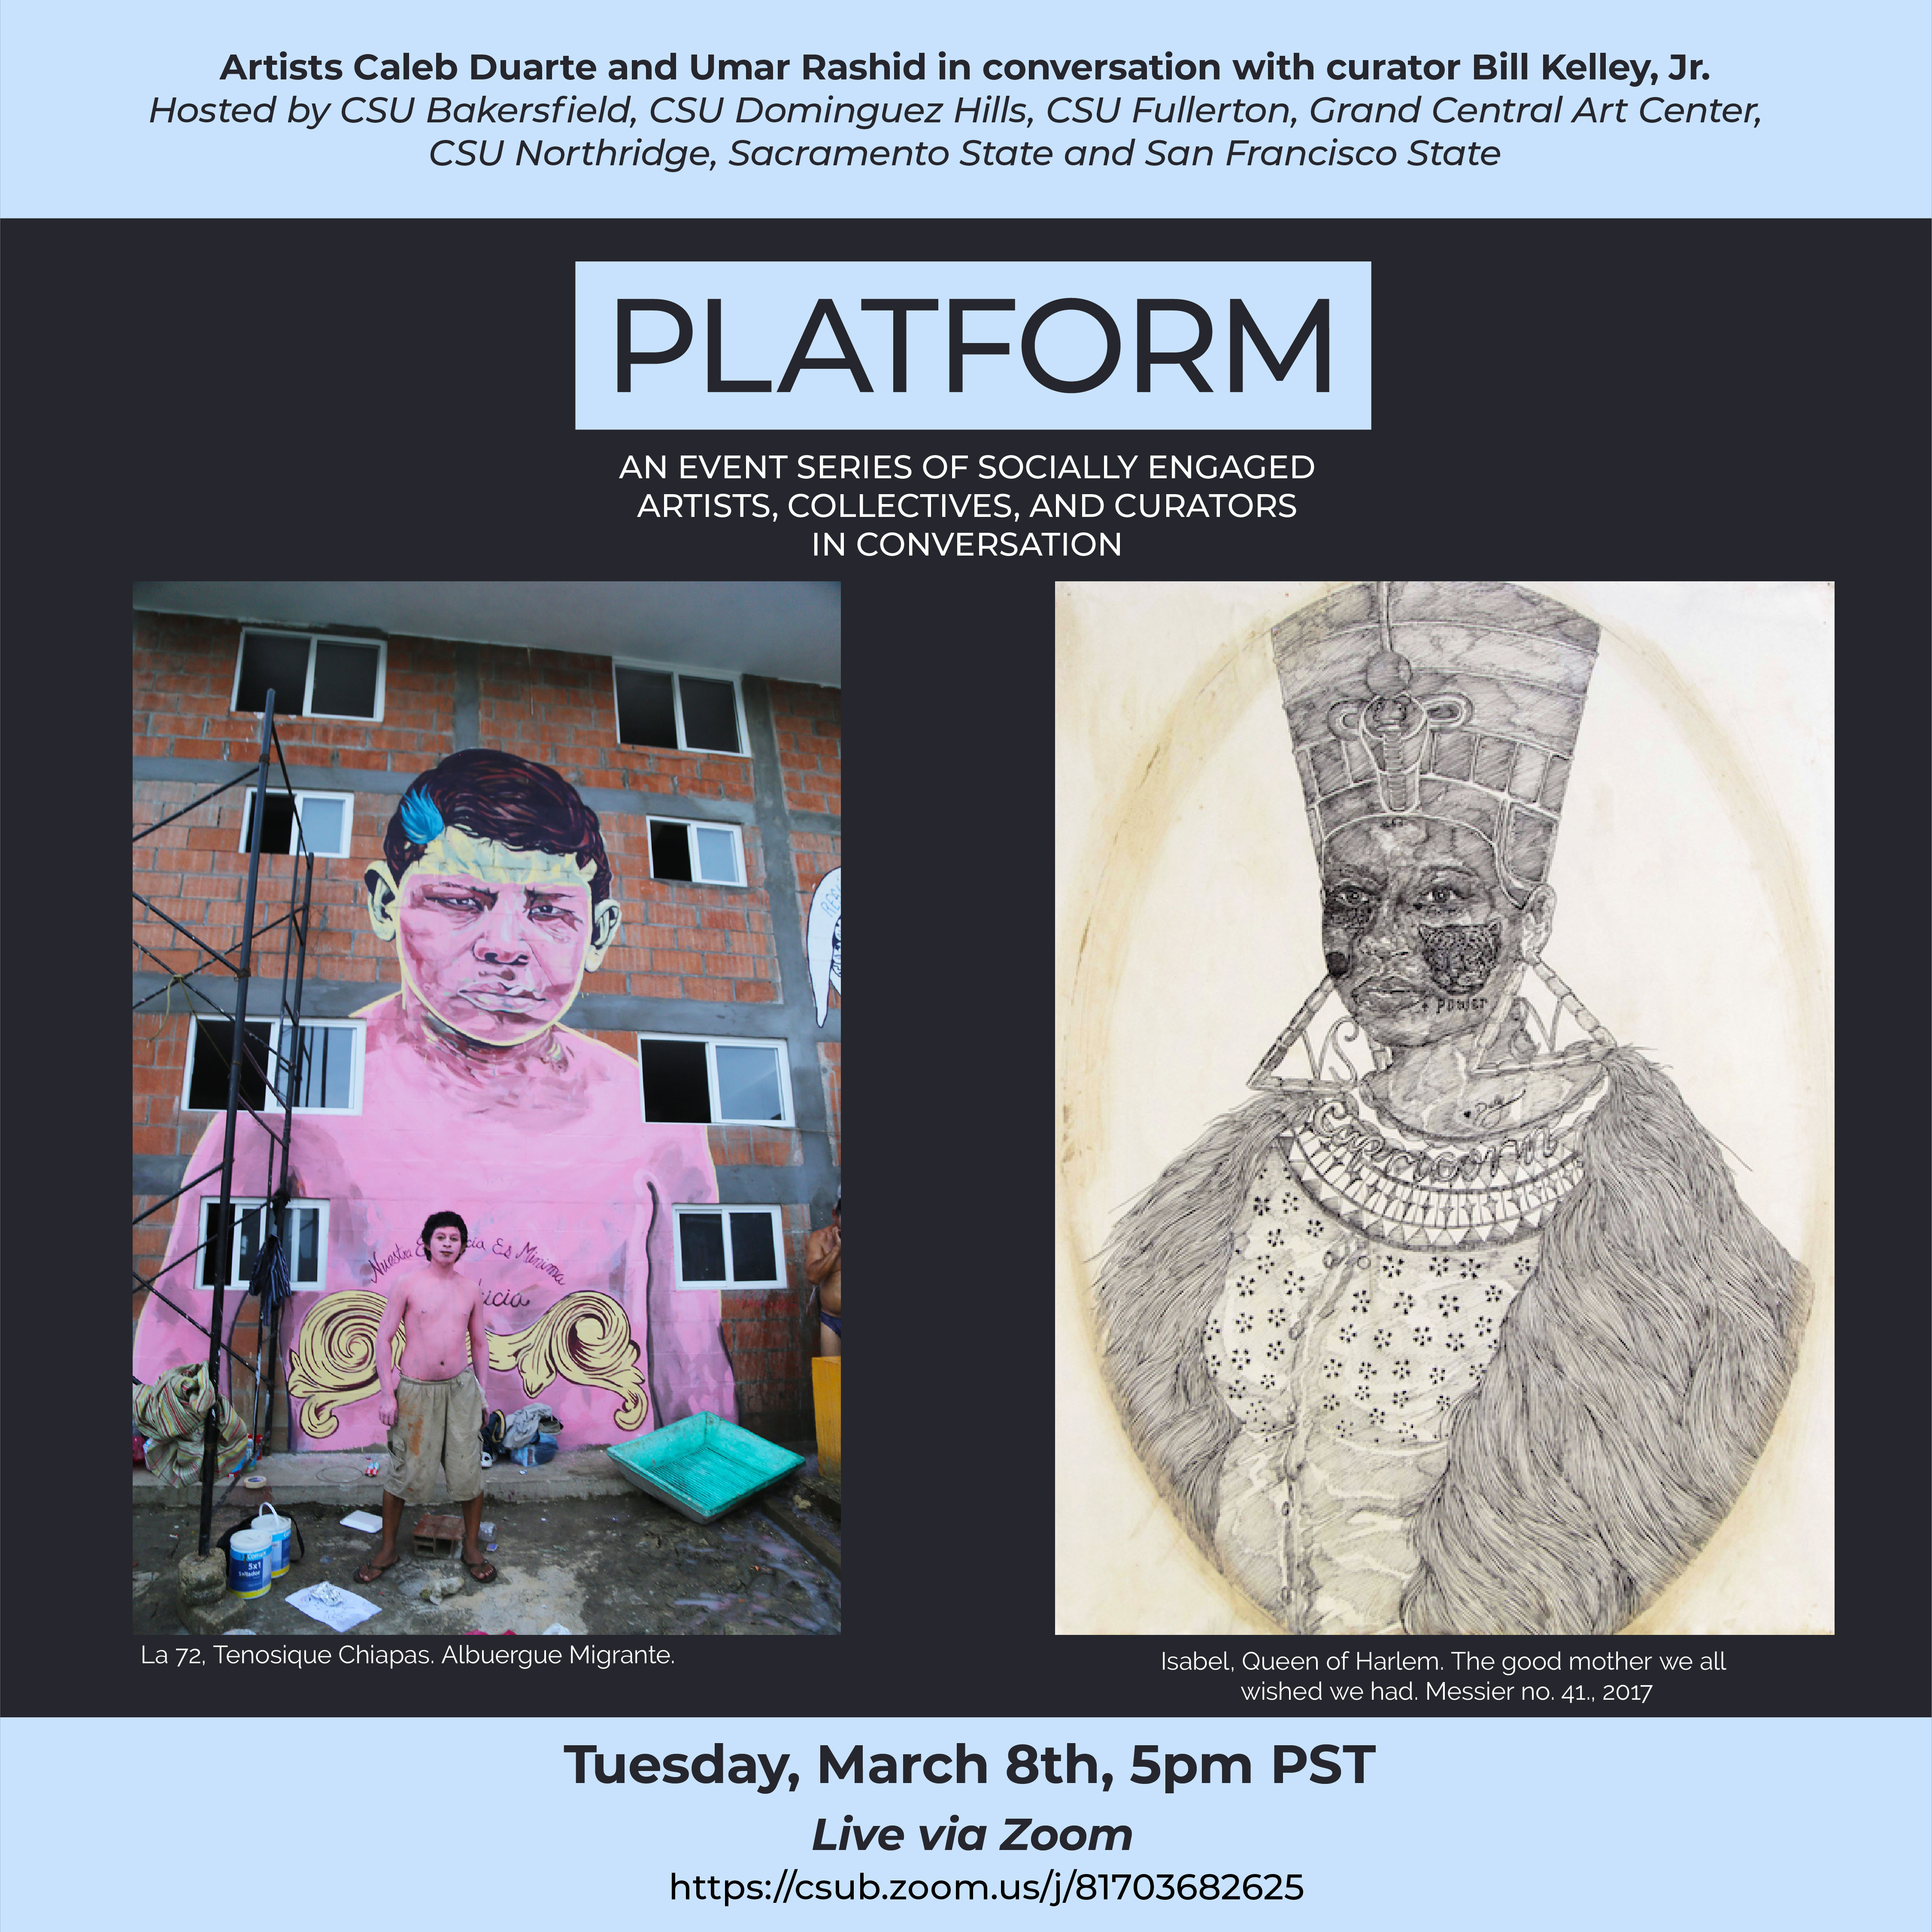 ConSortiUm’s PLATFORM online lecture series resumes with the artists Umar Rashid and Caleb Duarte, in conversation with curator Bill Kelley, Jr. It takes place Tuesday, March 8 at 5:00 p.m and will be presented live via Zoom with a recording available for post-live-stream viewing. The event is free and open to the public. See you there!